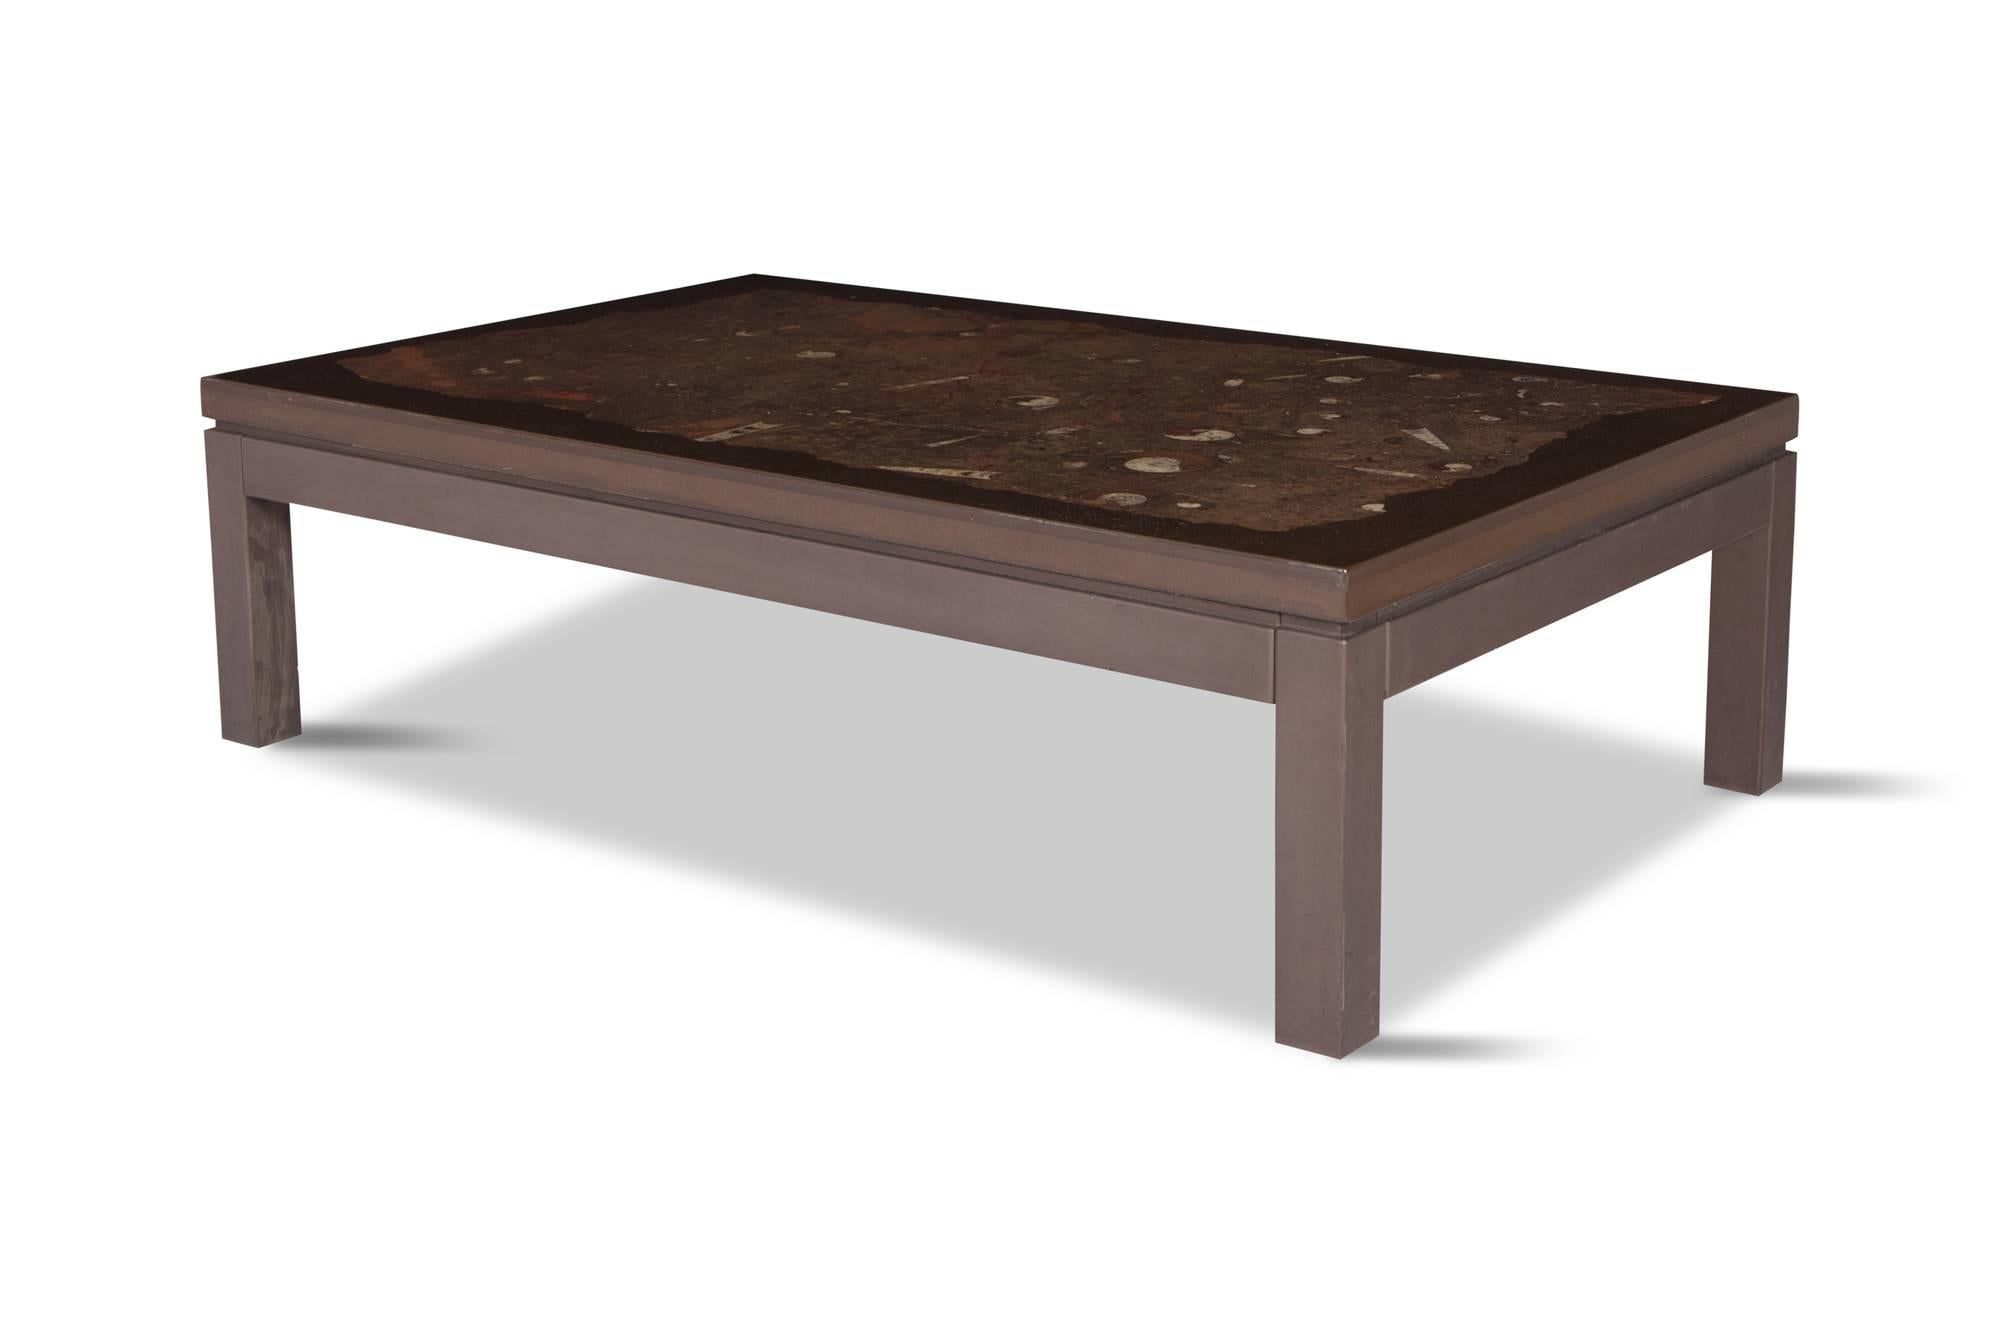 Hollywood regency rectangular coffee table by Etienne Allemeersch, an artisan who worked in the workshop of Ado Chale, in resin with a fossil stone inlay and wooden base. The table top exposes beautiful earthy colours with a variety of fossils and